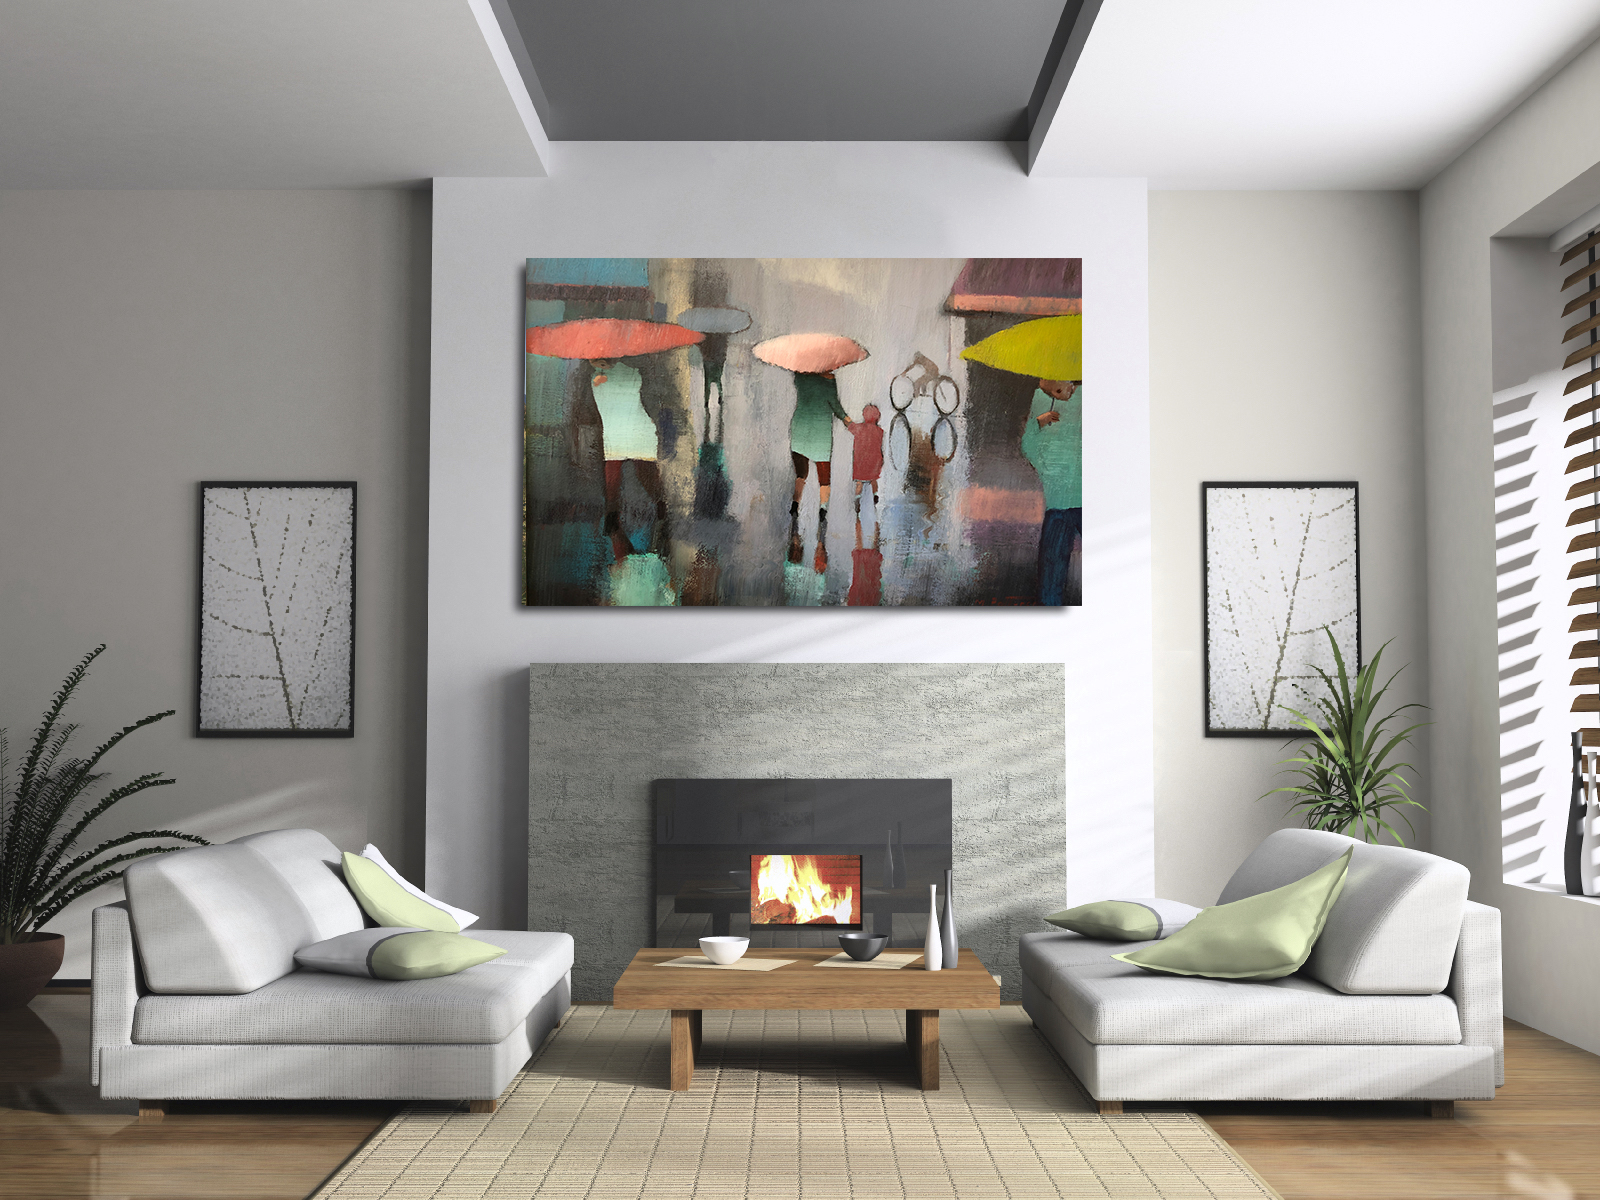 Beautiful room with Art above fireplace